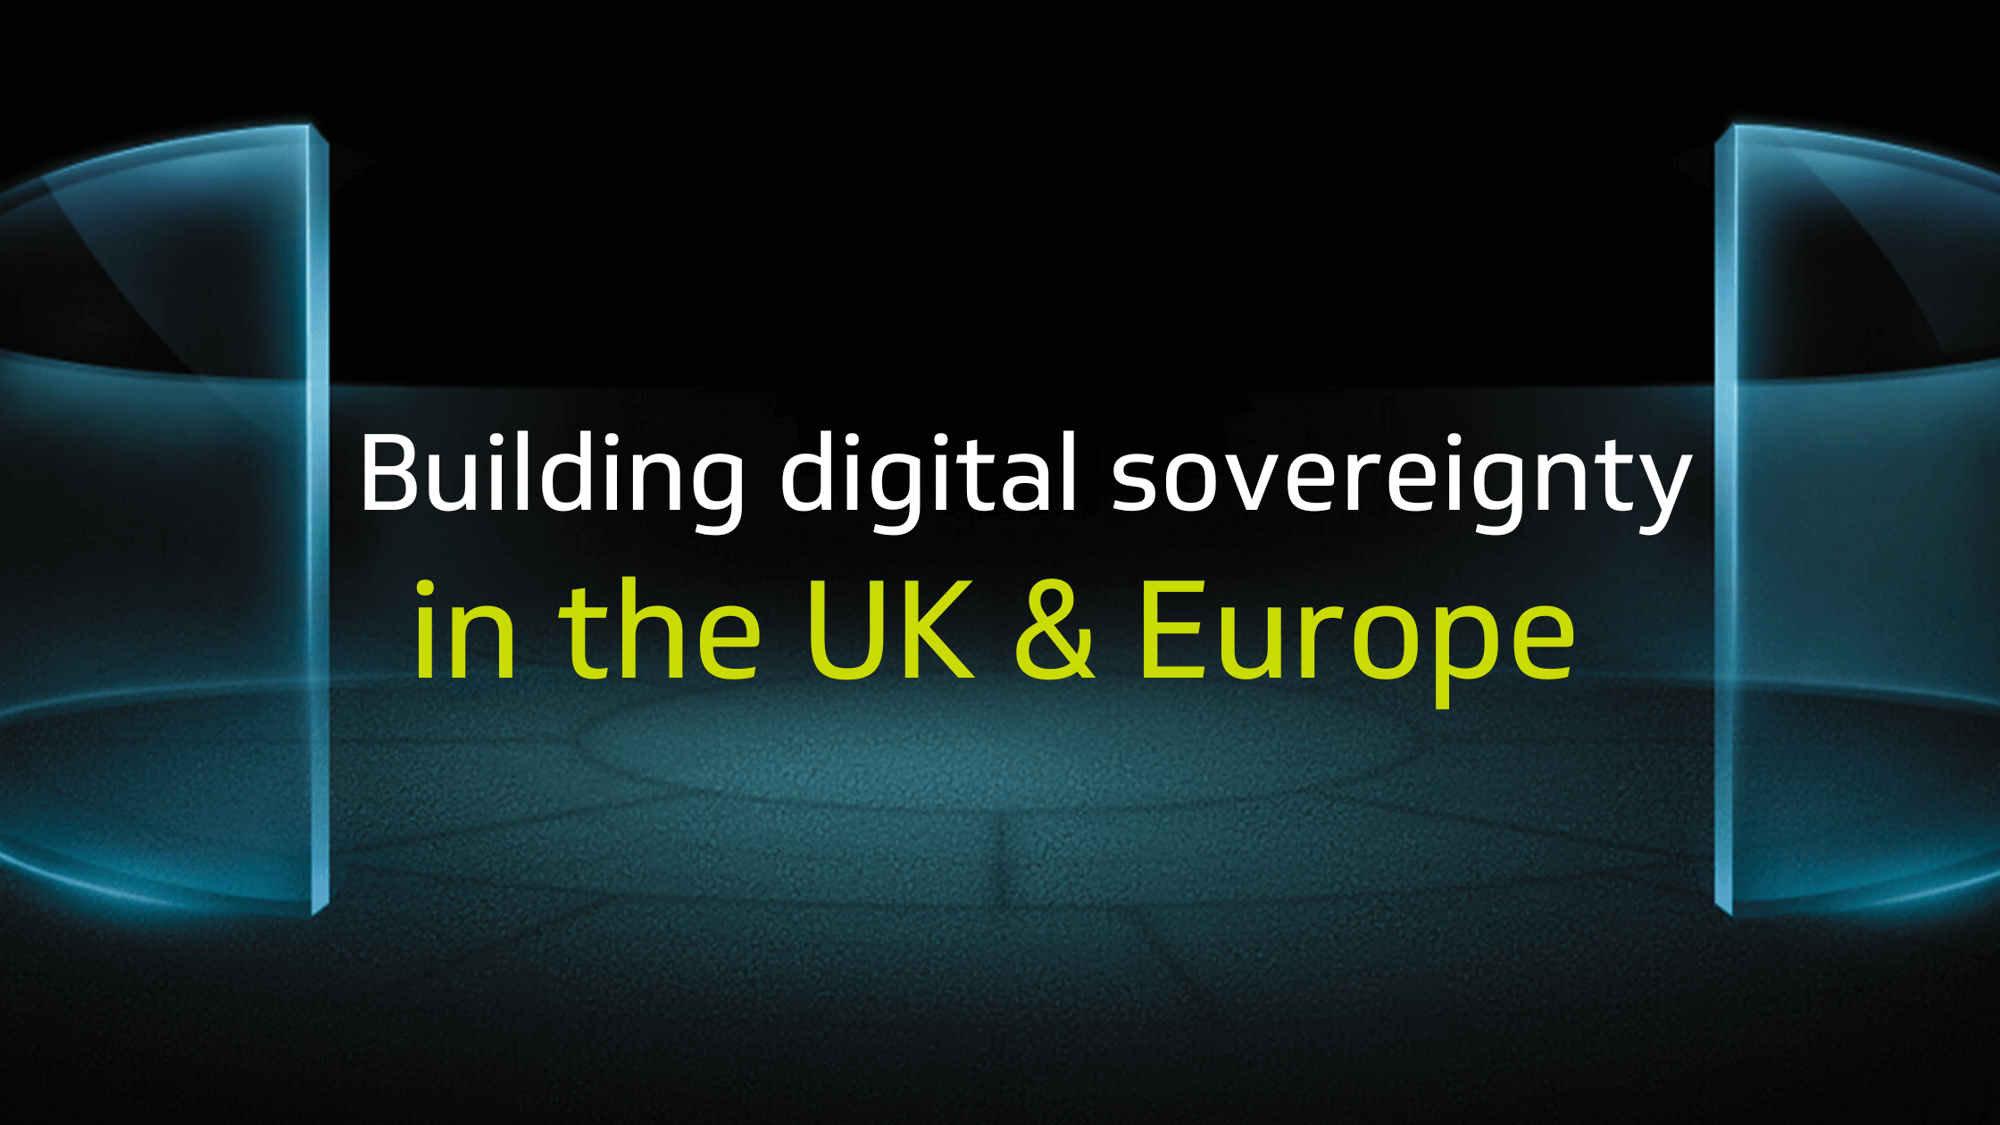 Building digital sovereignty in the UK & Europe